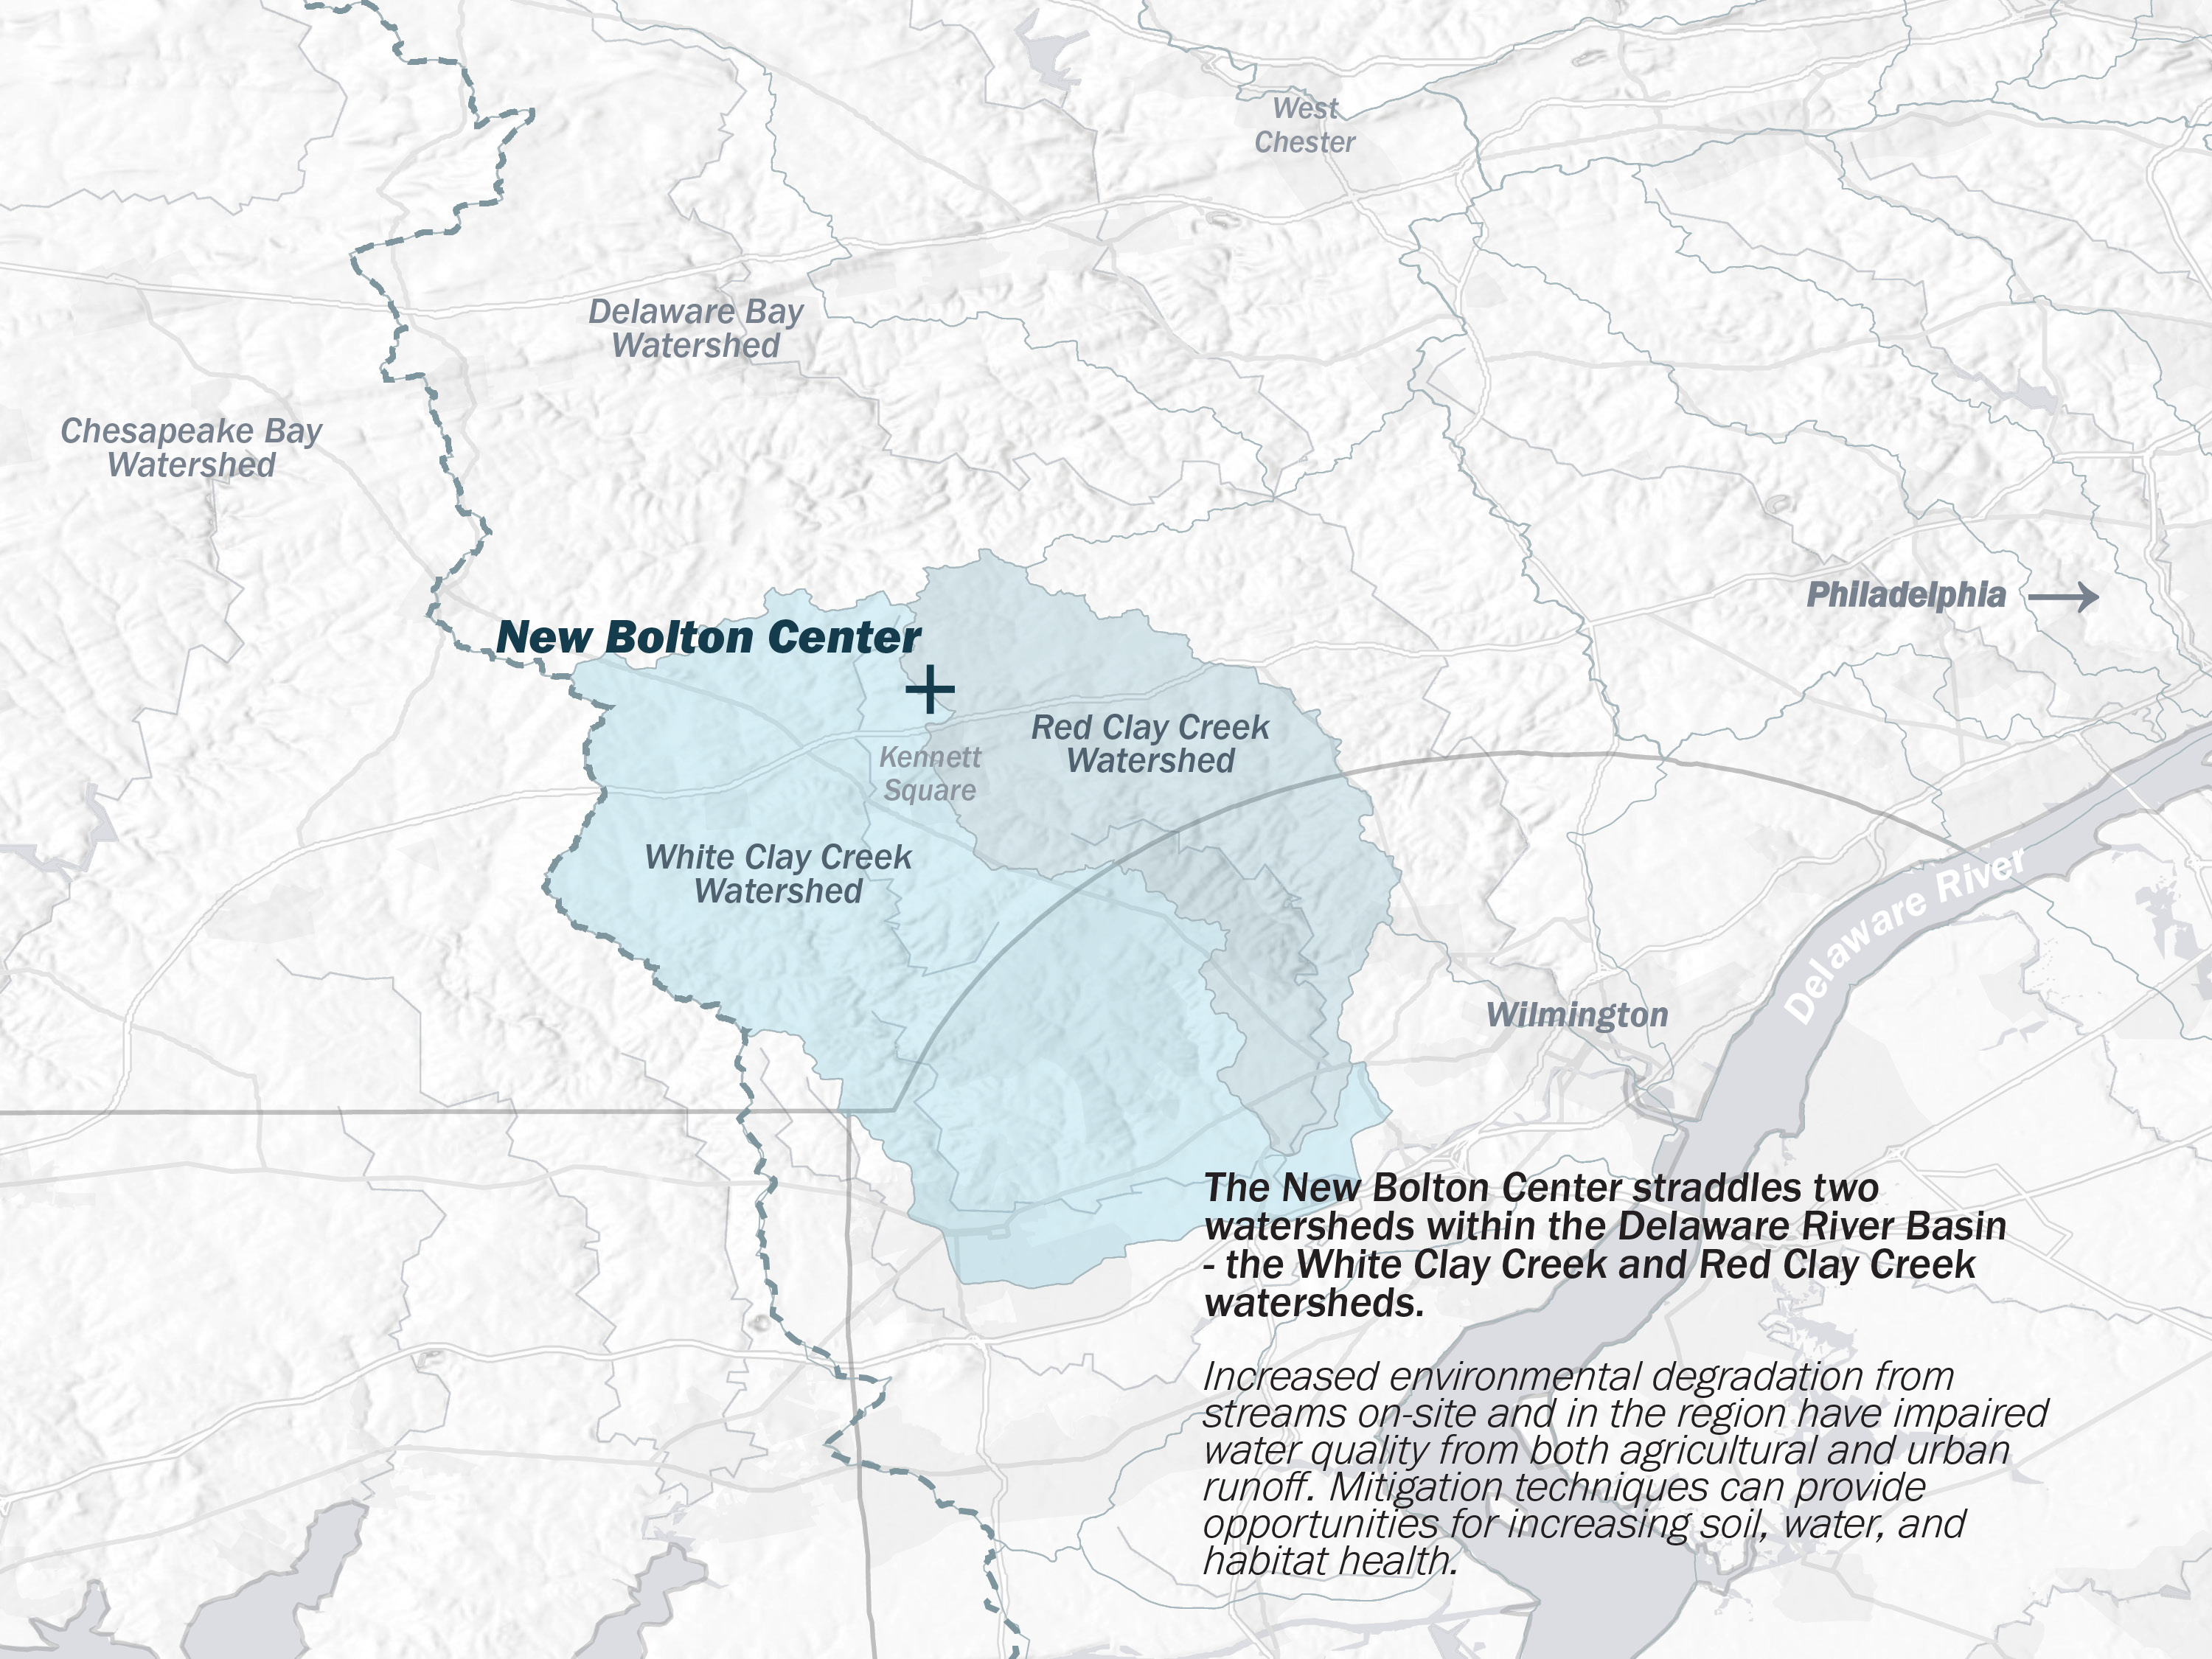 Map of the New Bolton Center and regional watersheds within the Delaware River Basin